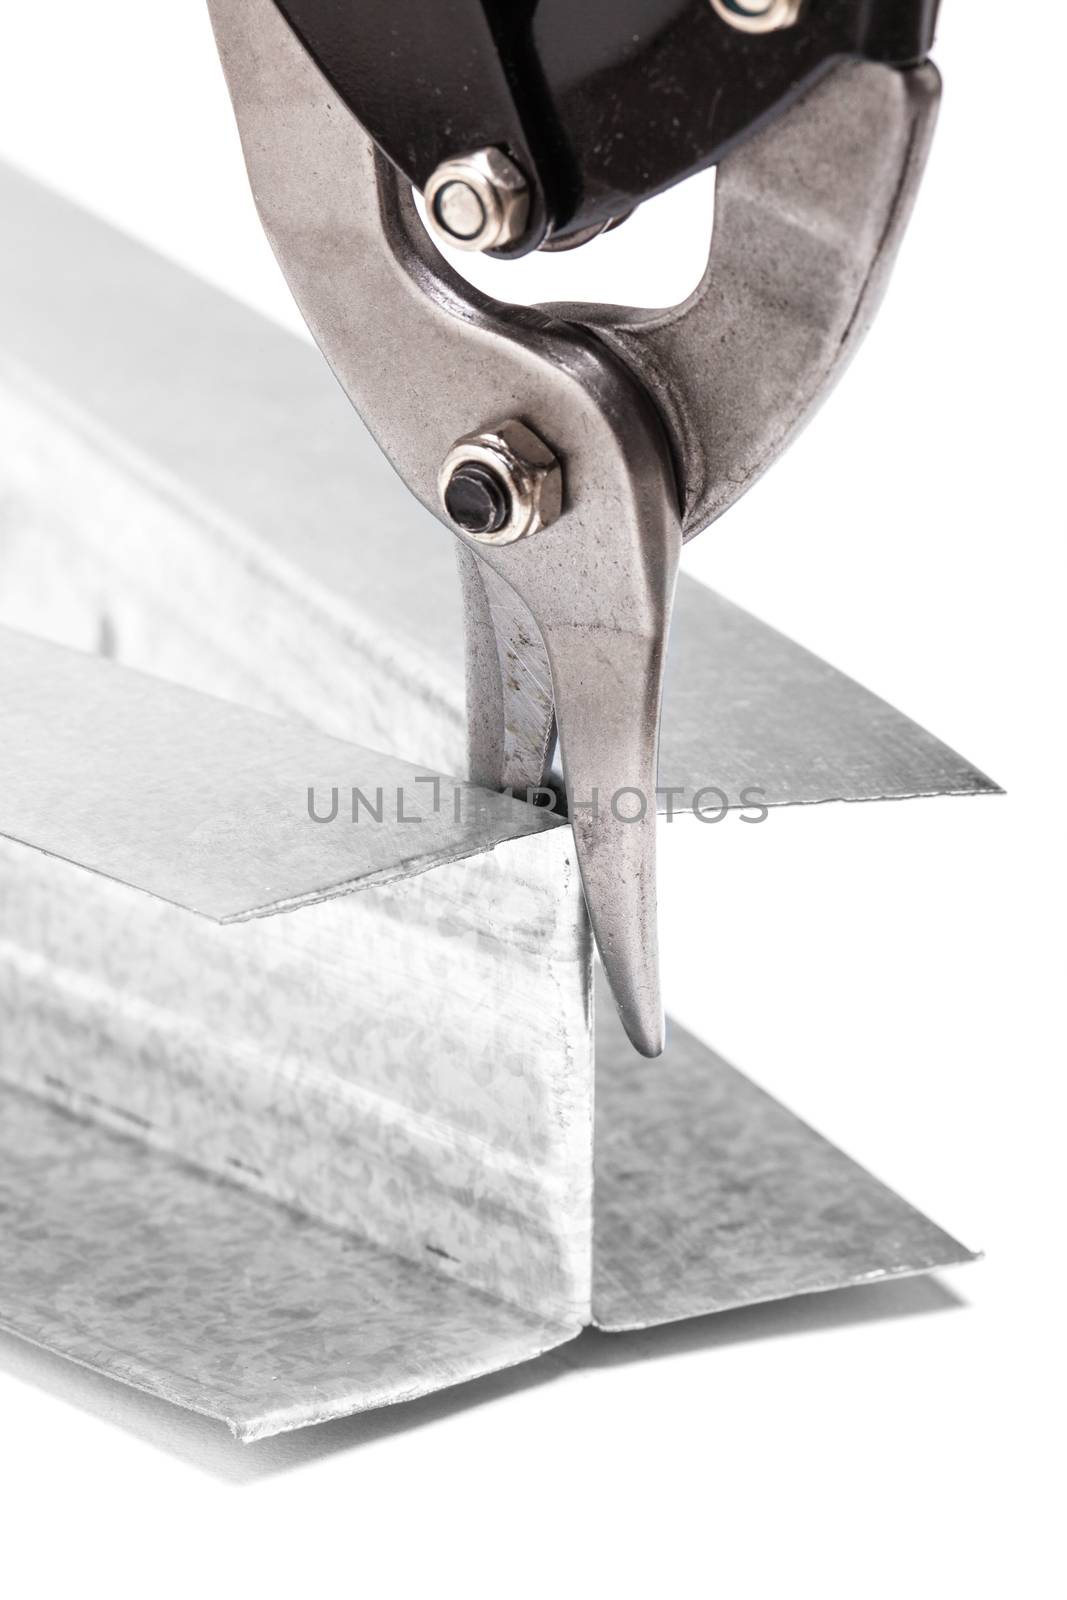 industrial scissors cutting U-shaped metal profile for drywall support isolated on white background